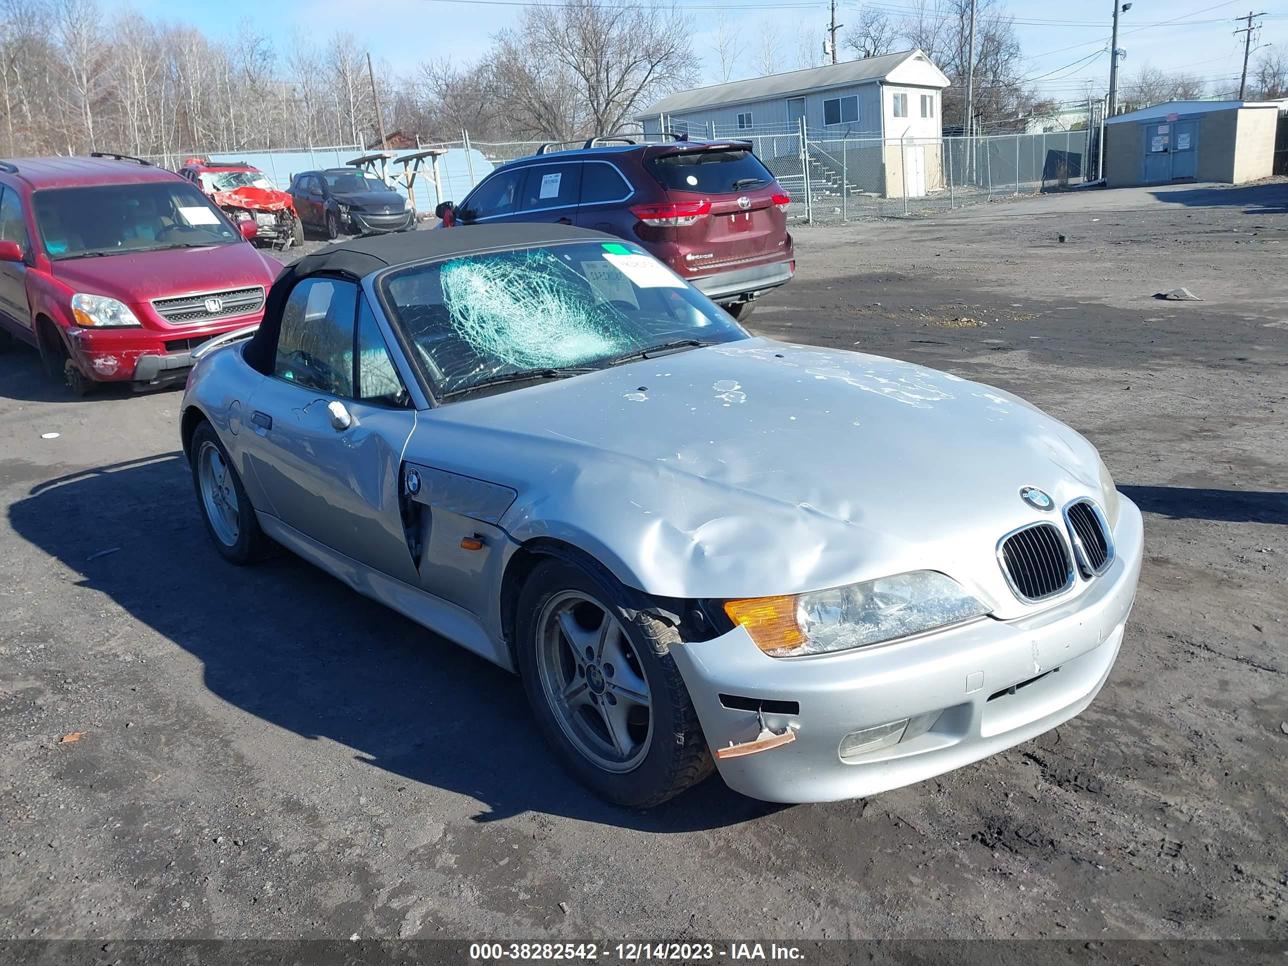 vin: 4USCH7321WLE07907 4USCH7321WLE07907 1998 bmw z3 1900 for Sale in 18640, 103 Thompson St, Pittston, USA